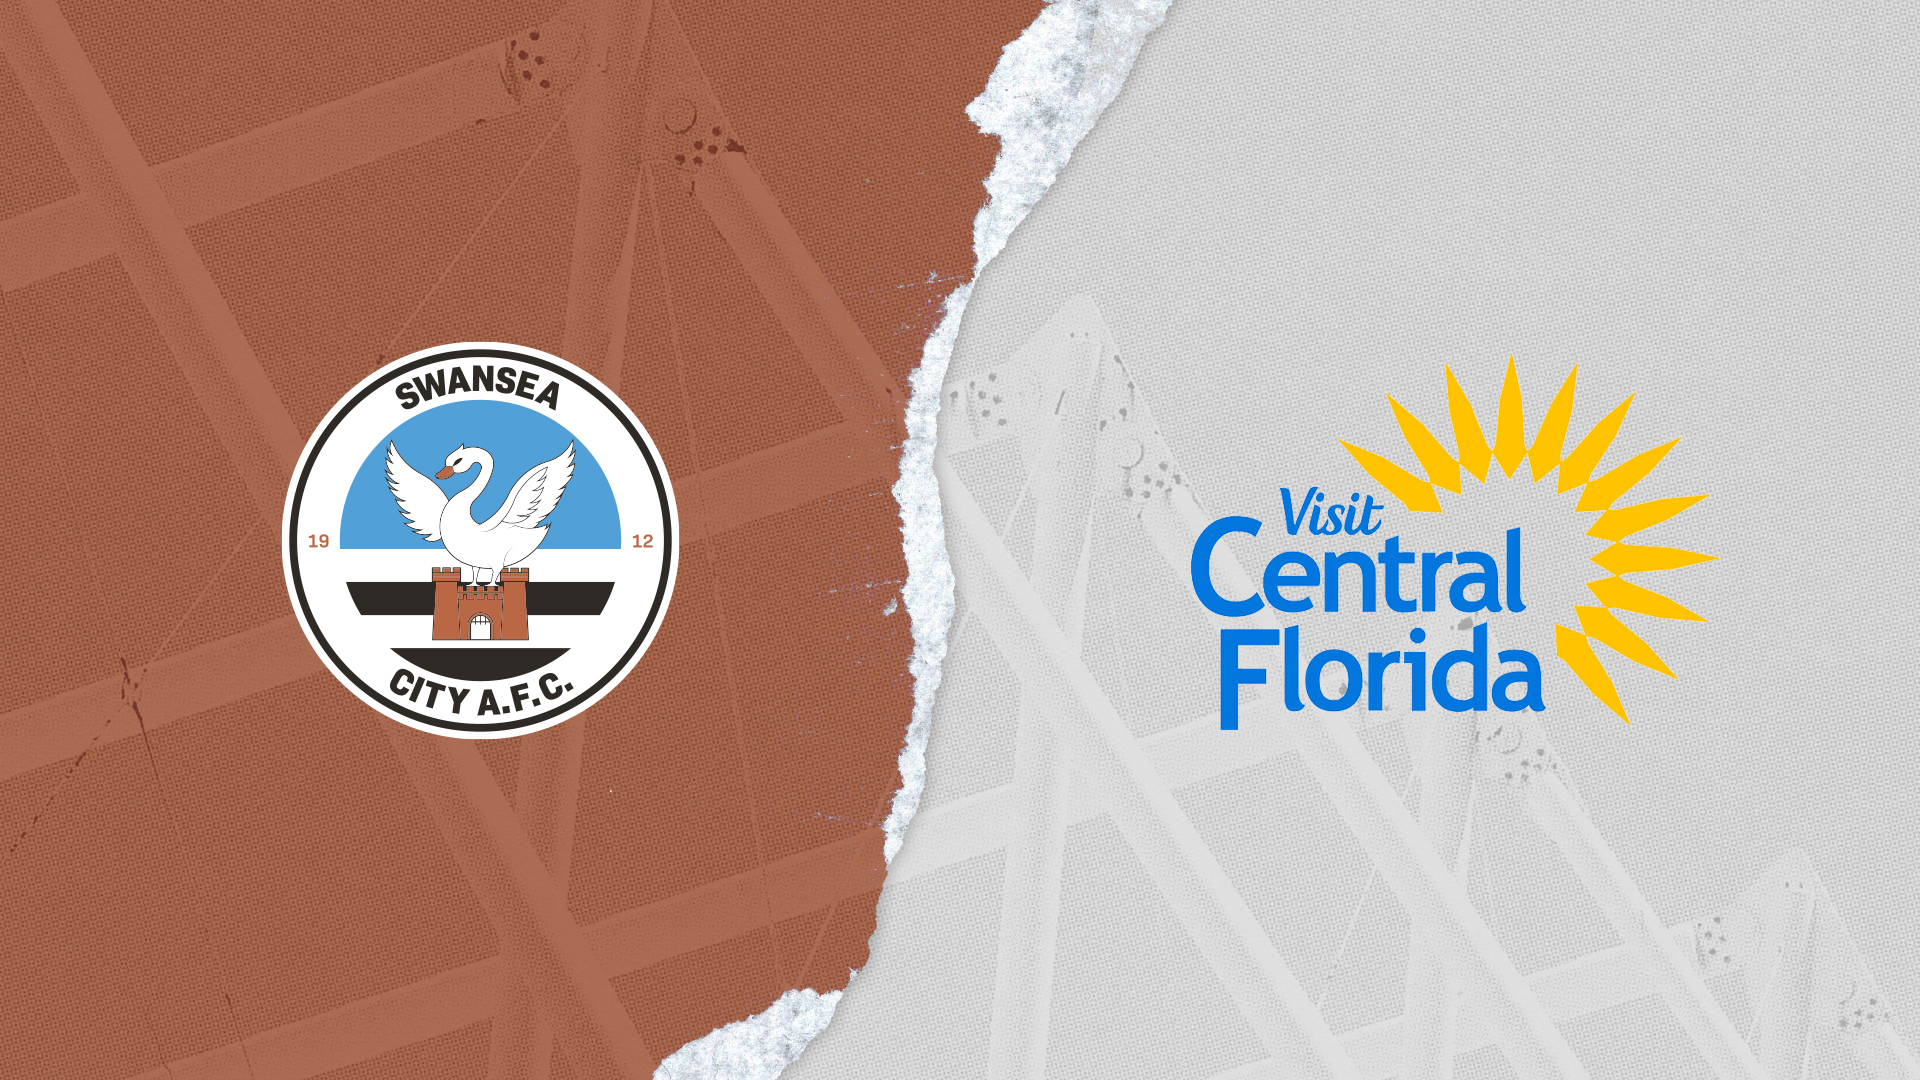 Graphic showing Swansea City badge and Visit Central Florida logo